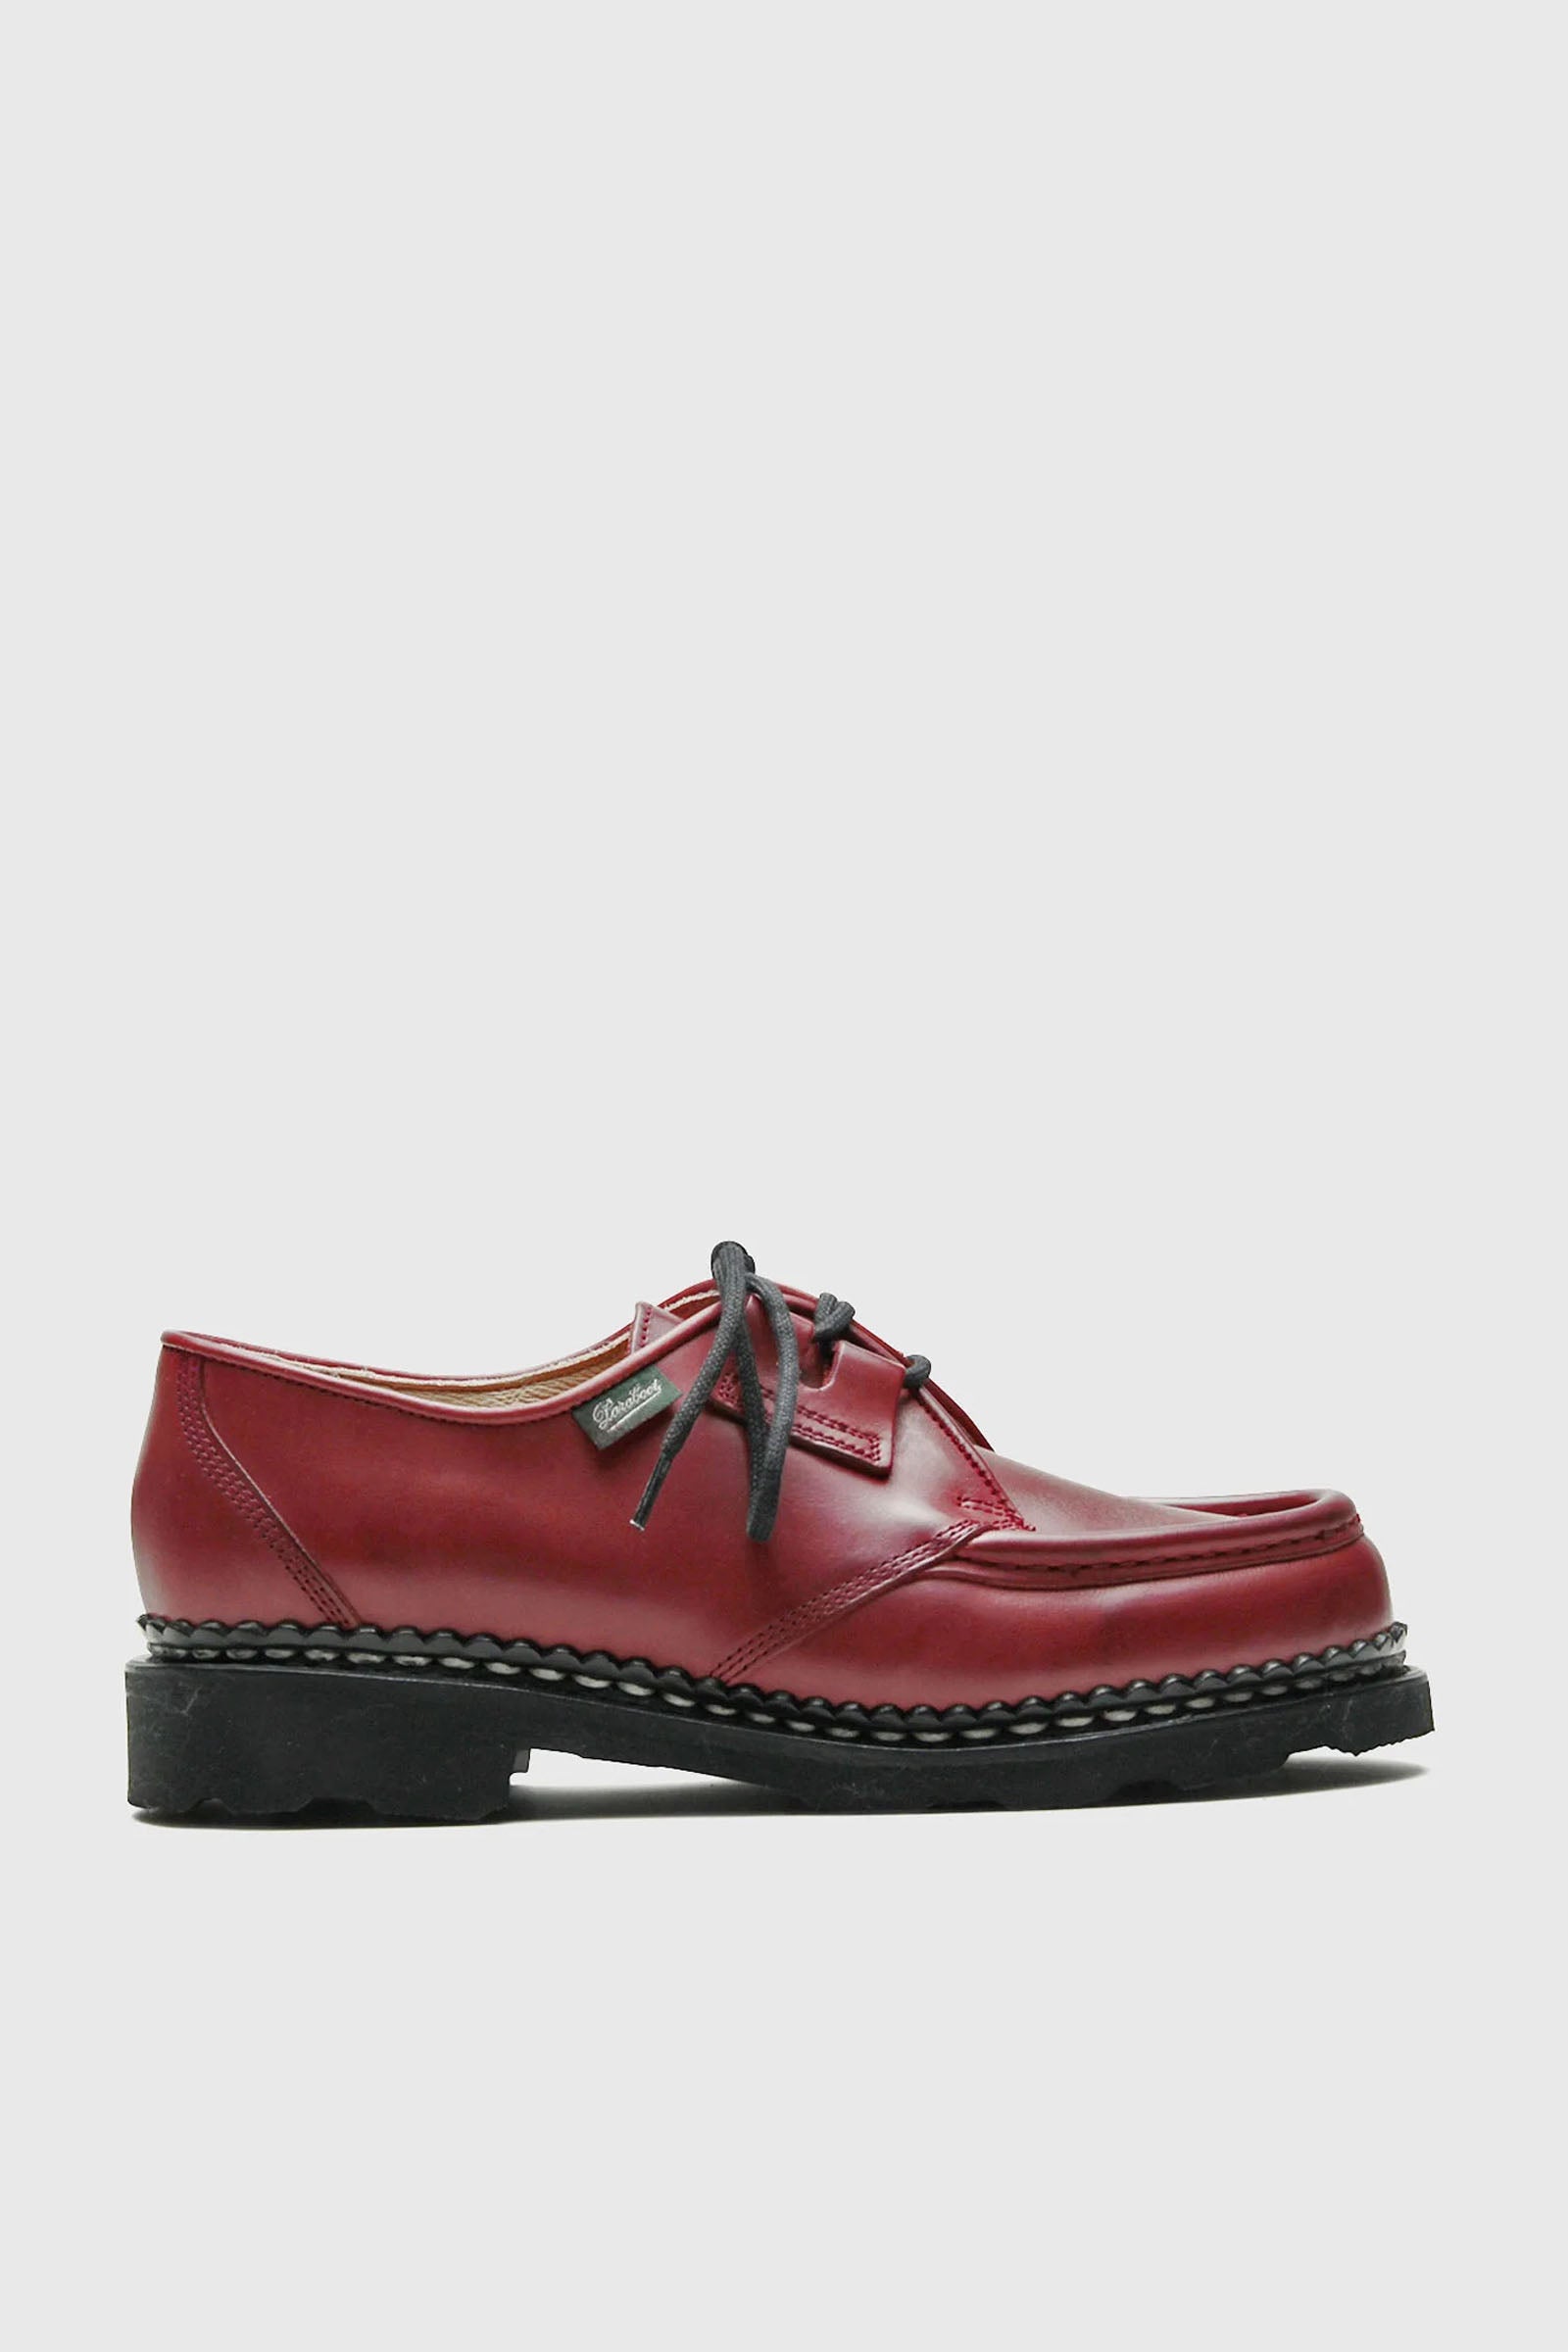 Beaubourg Lisse Rouge Derby Shoes - 1